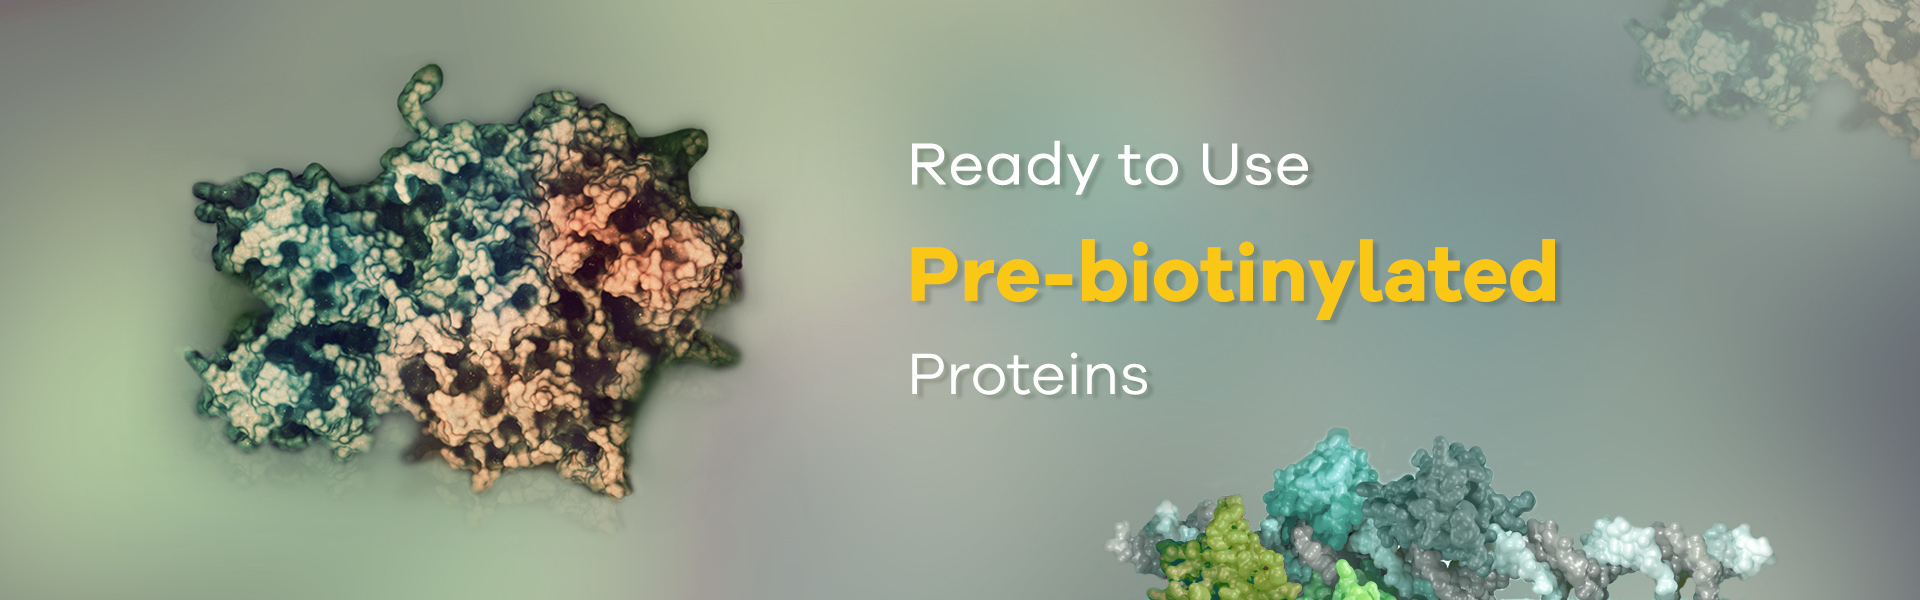 Ready to Use Pre-biotinylated Proteins